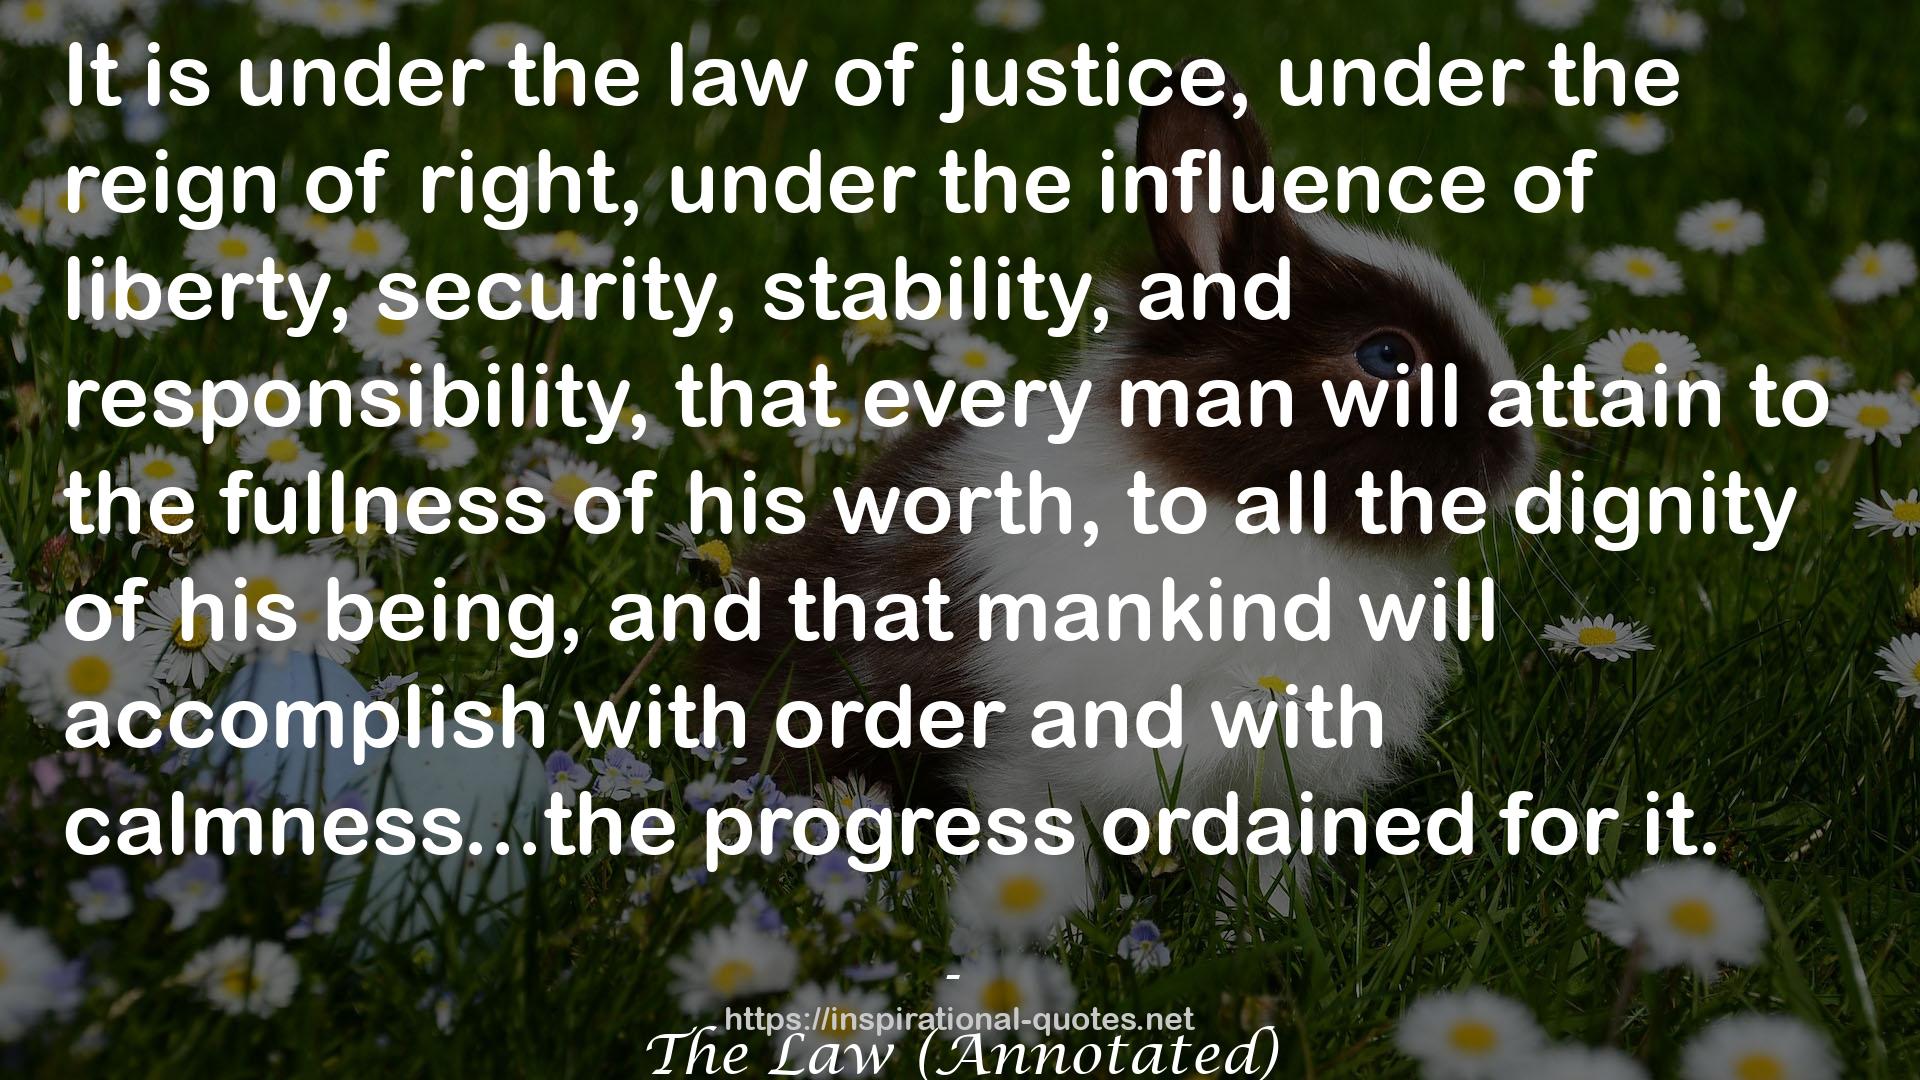 The Law (Annotated) QUOTES